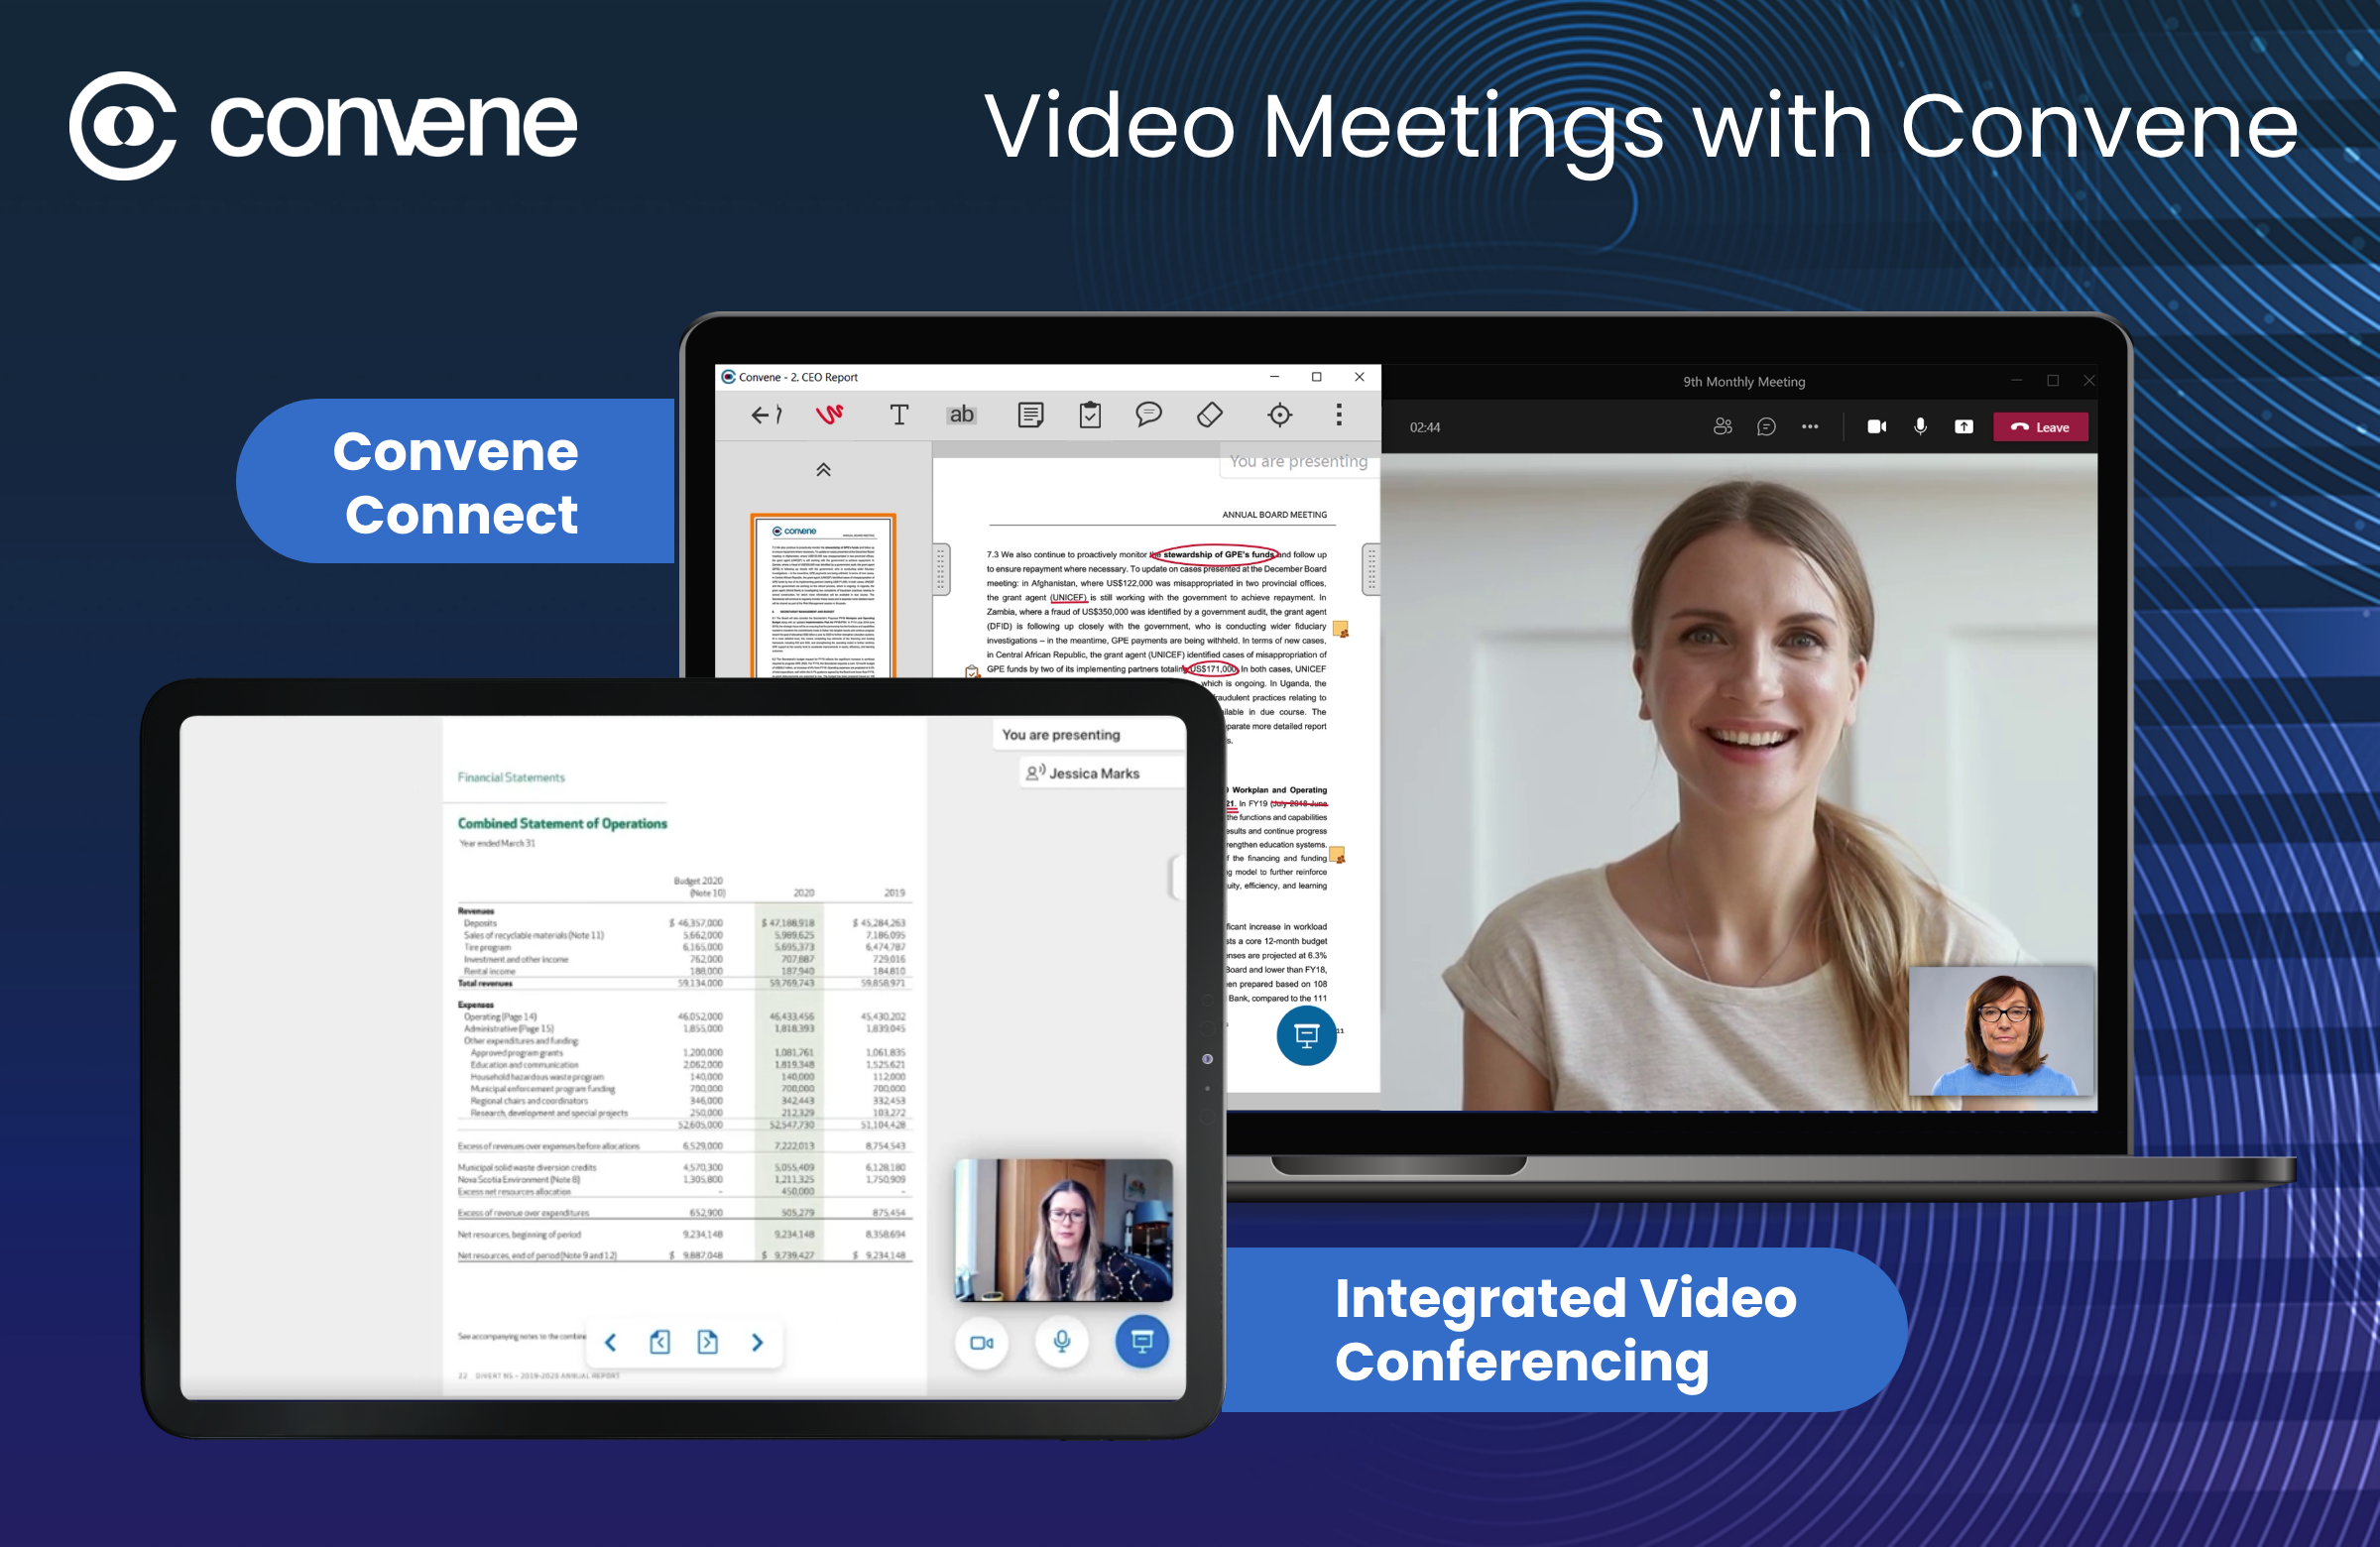 Complete your virtual meeting experience with a side-by-side view of your document and video call—via built-in Zoom or Convene Connect—on one screen.